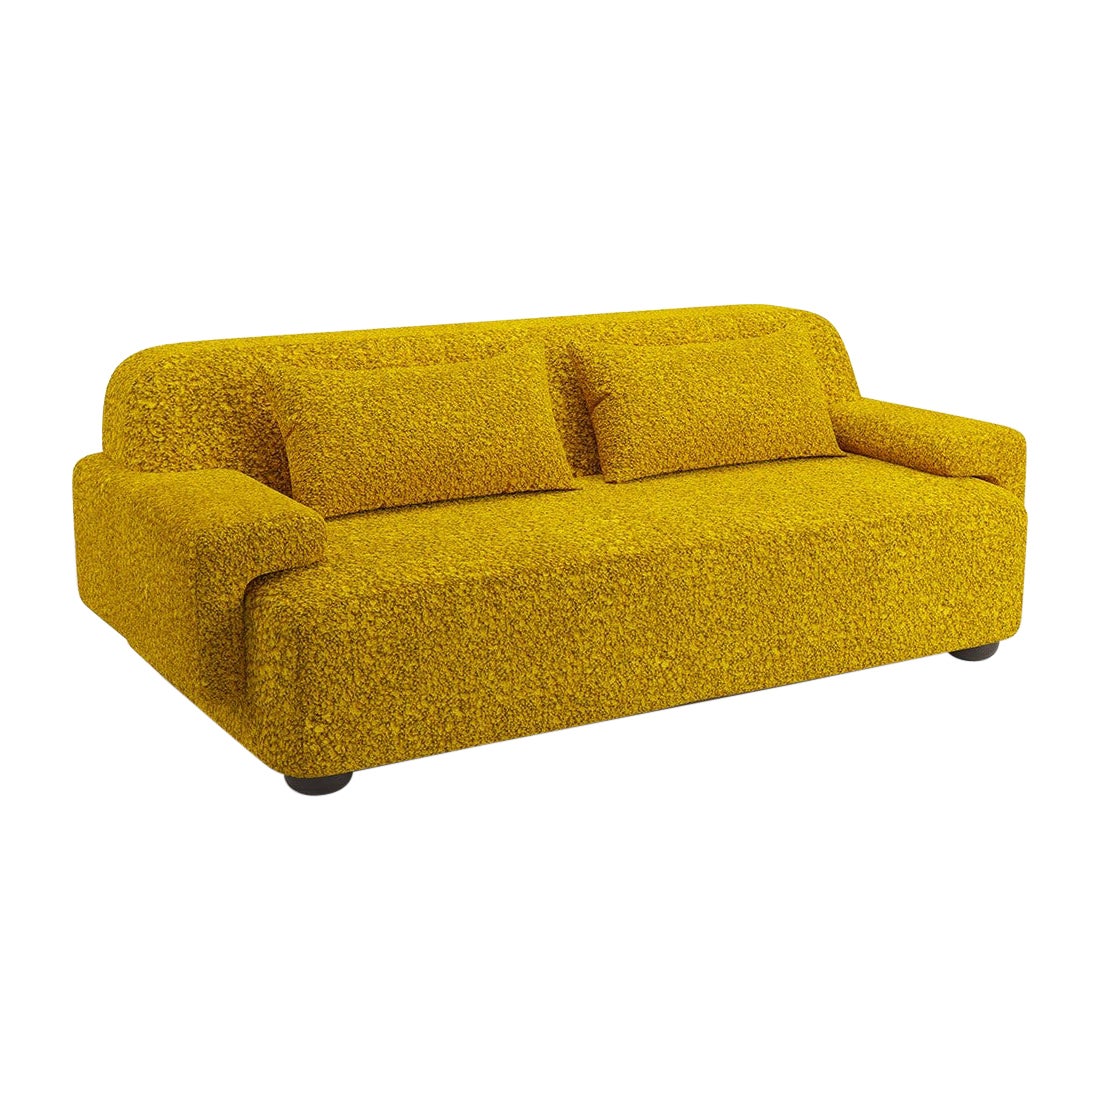 Popus Editions Lena 3 Seater Sofa in Amber Athena Loop Yarn Upholstery